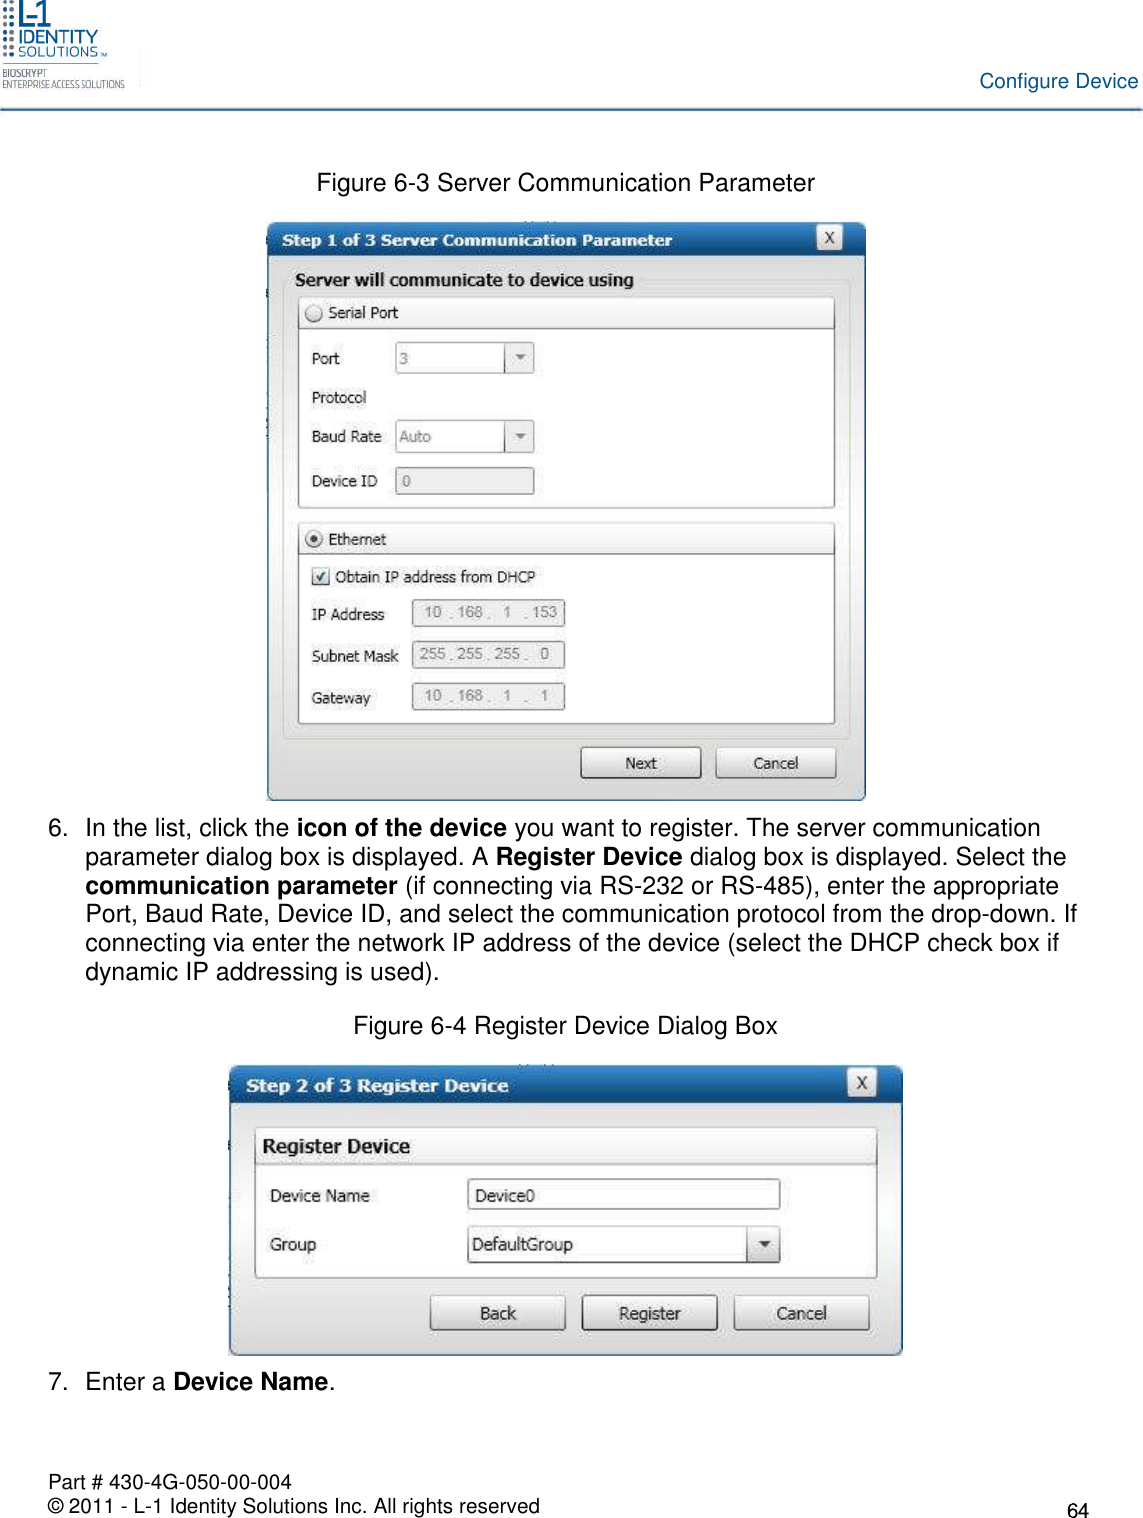 Part # 430-4G-050-00-004© 2011 - L-1 Identity Solutions Inc. All rights reservedConfigure DeviceFigure 6-3 Server Communication Parameter6. In the list, click the icon of the device you want to register. The server communicationparameter dialog box is displayed. A Register Device dialog box is displayed. Select thecommunication parameter (if connecting via RS-232 or RS-485), enter the appropriatePort, Baud Rate, Device ID, and select the communication protocol from the drop-down. Ifconnecting via enter the network IP address of the device (select the DHCP check box ifdynamic IP addressing is used).Figure 6-4 Register Device Dialog Box7. Enter a Device Name.